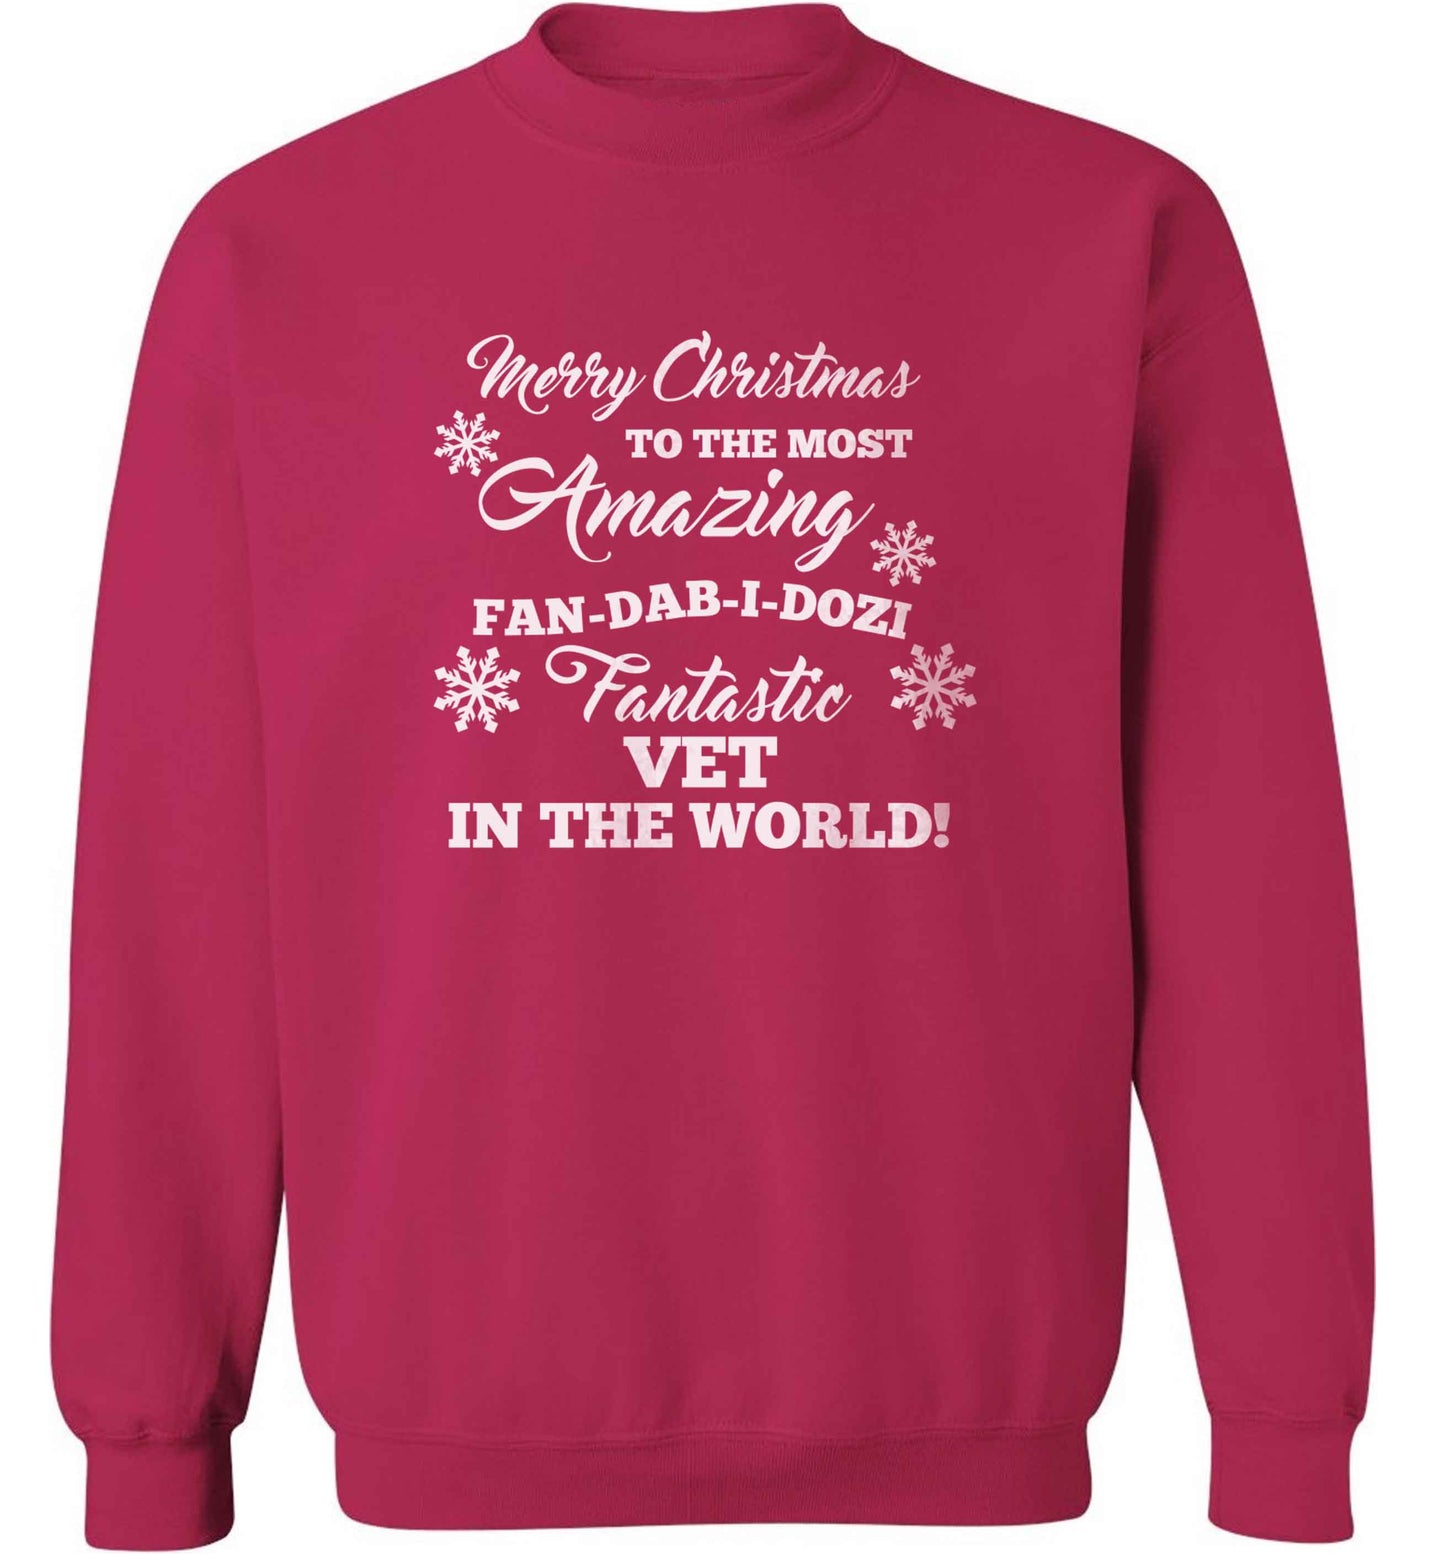 Merry Christmas to the most amazing vet in the world! adult's unisex pink sweater 2XL